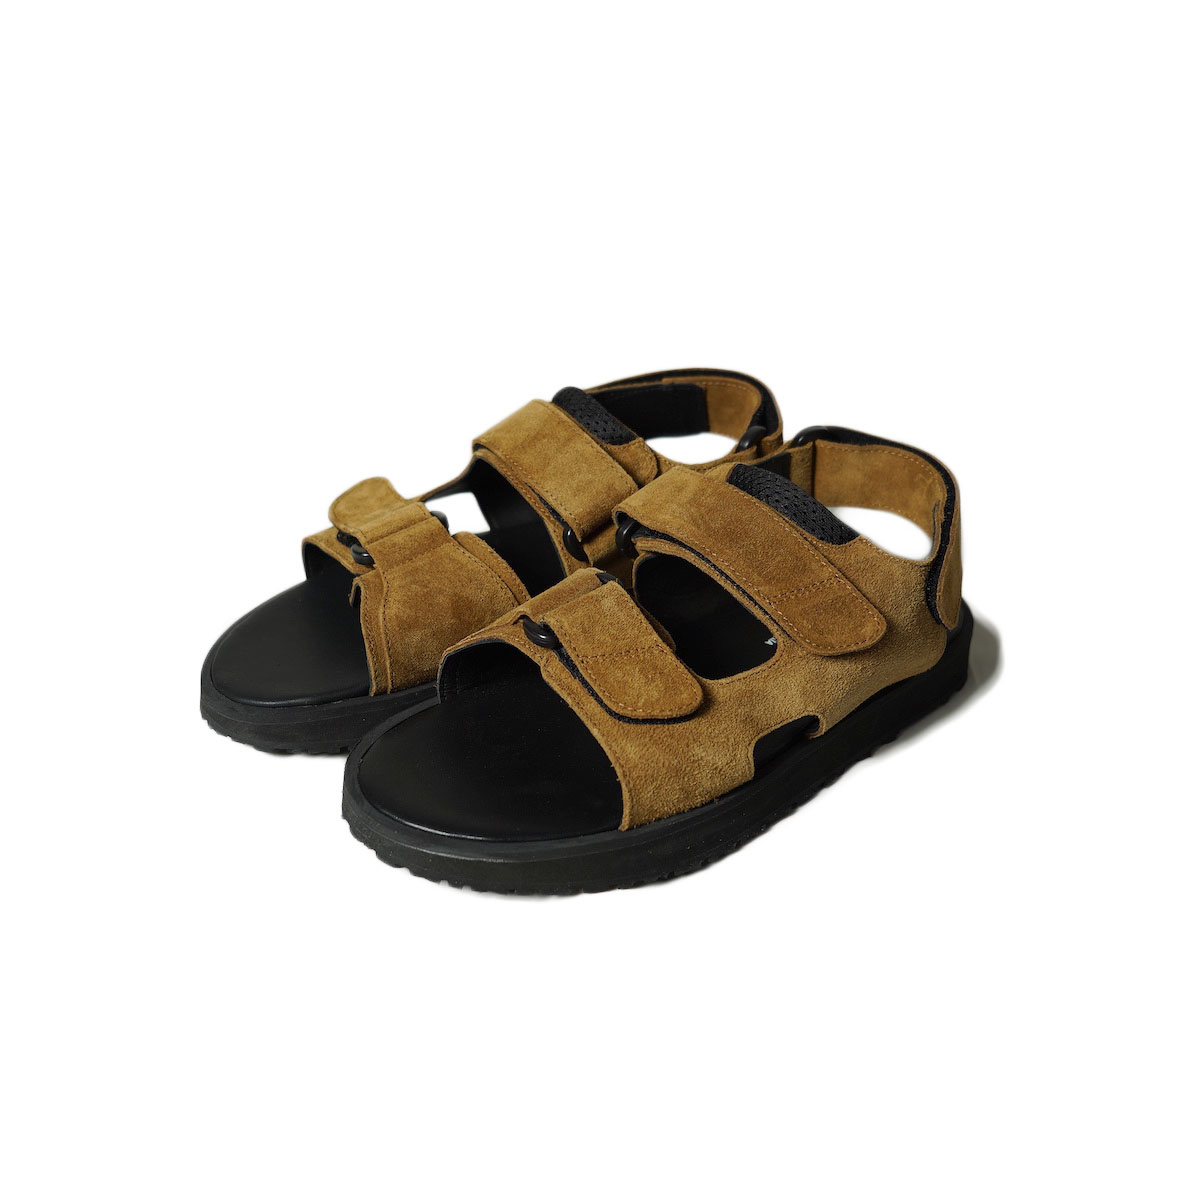 REPRODUCTION OF FOUND / BRITISH MILITARY SANDAL (Dark Camel Suede)